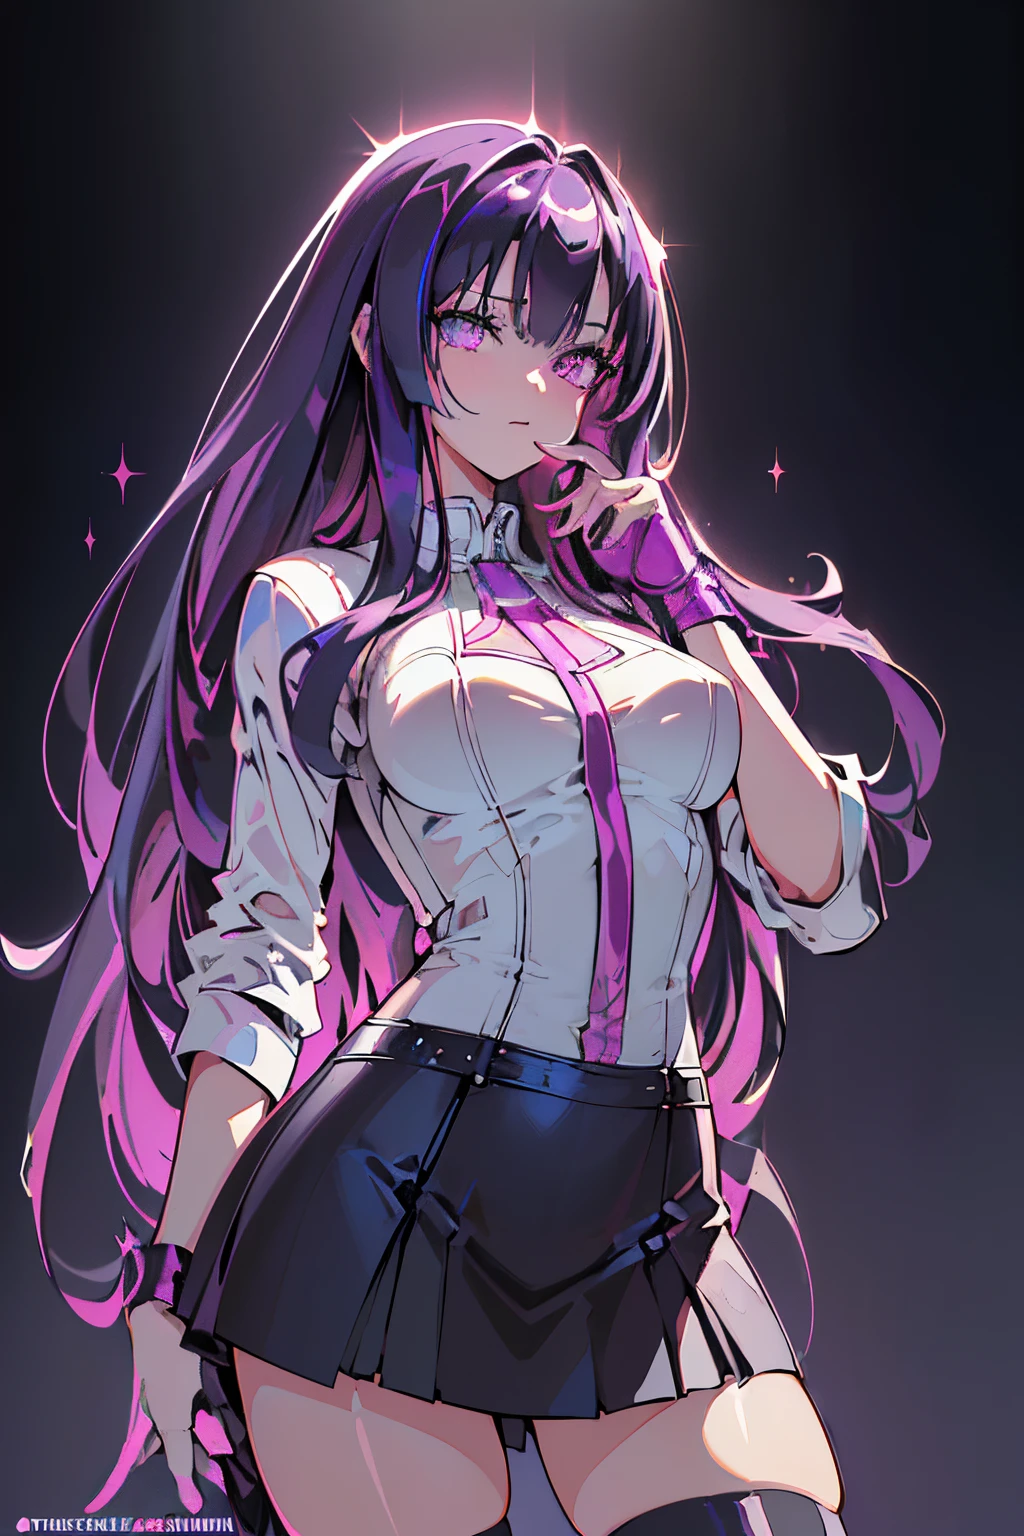 Anime, Girl, (((1girl))), Techwear, (((Deep Violet Hair, Long Hair))), ((Vibrant Light Purple Eyes eyes:1.3, Upturned Eyes: 1, Perfect Eyes, Beautiful Detailed Eyes, Gradient eyes: 1, Finely Detailed Beautiful Eyes: 1, Symmetrical Eyes: 1, Big Highlight On Eyes: 1.2)), ((Fat)), (((Lustrous Skin: 1.5, Bright Skin: 1.5, Skin Fair, Shiny Skin, Very Shiny Skin, Shiny Body, Plastic Glitter Skin, Exaggerated Shiny Skin, Illuminated Skin))), (Detailed Body, (Detailed Face)), Young, Idol Pose, (Best Quality), Cyberpunk Jacket, Shirt, Loose Skirt, Stockings, Garterbelt, Modest Clothing, Skin Covered, Cute Disposition, High Resolution, Sharp Focus, Ultra Detailed, Extremely Detailed, Extremely High Quality Artwork, (Realistic, Photorealistic: 1.37), 8k_Wallpaper, (Extremely Detailed CG 8k), (Very Fine 8K CG), ((Hyper Super Ultra Detailed Perfect Piece)), (((Flawlessmasterpiece))), Illustration, Vibrant Colors, (Intricate), High Contrast, Selective Lighting, Double Exposure, HDR (High Dynamic Range), Post-processing, Background Blur